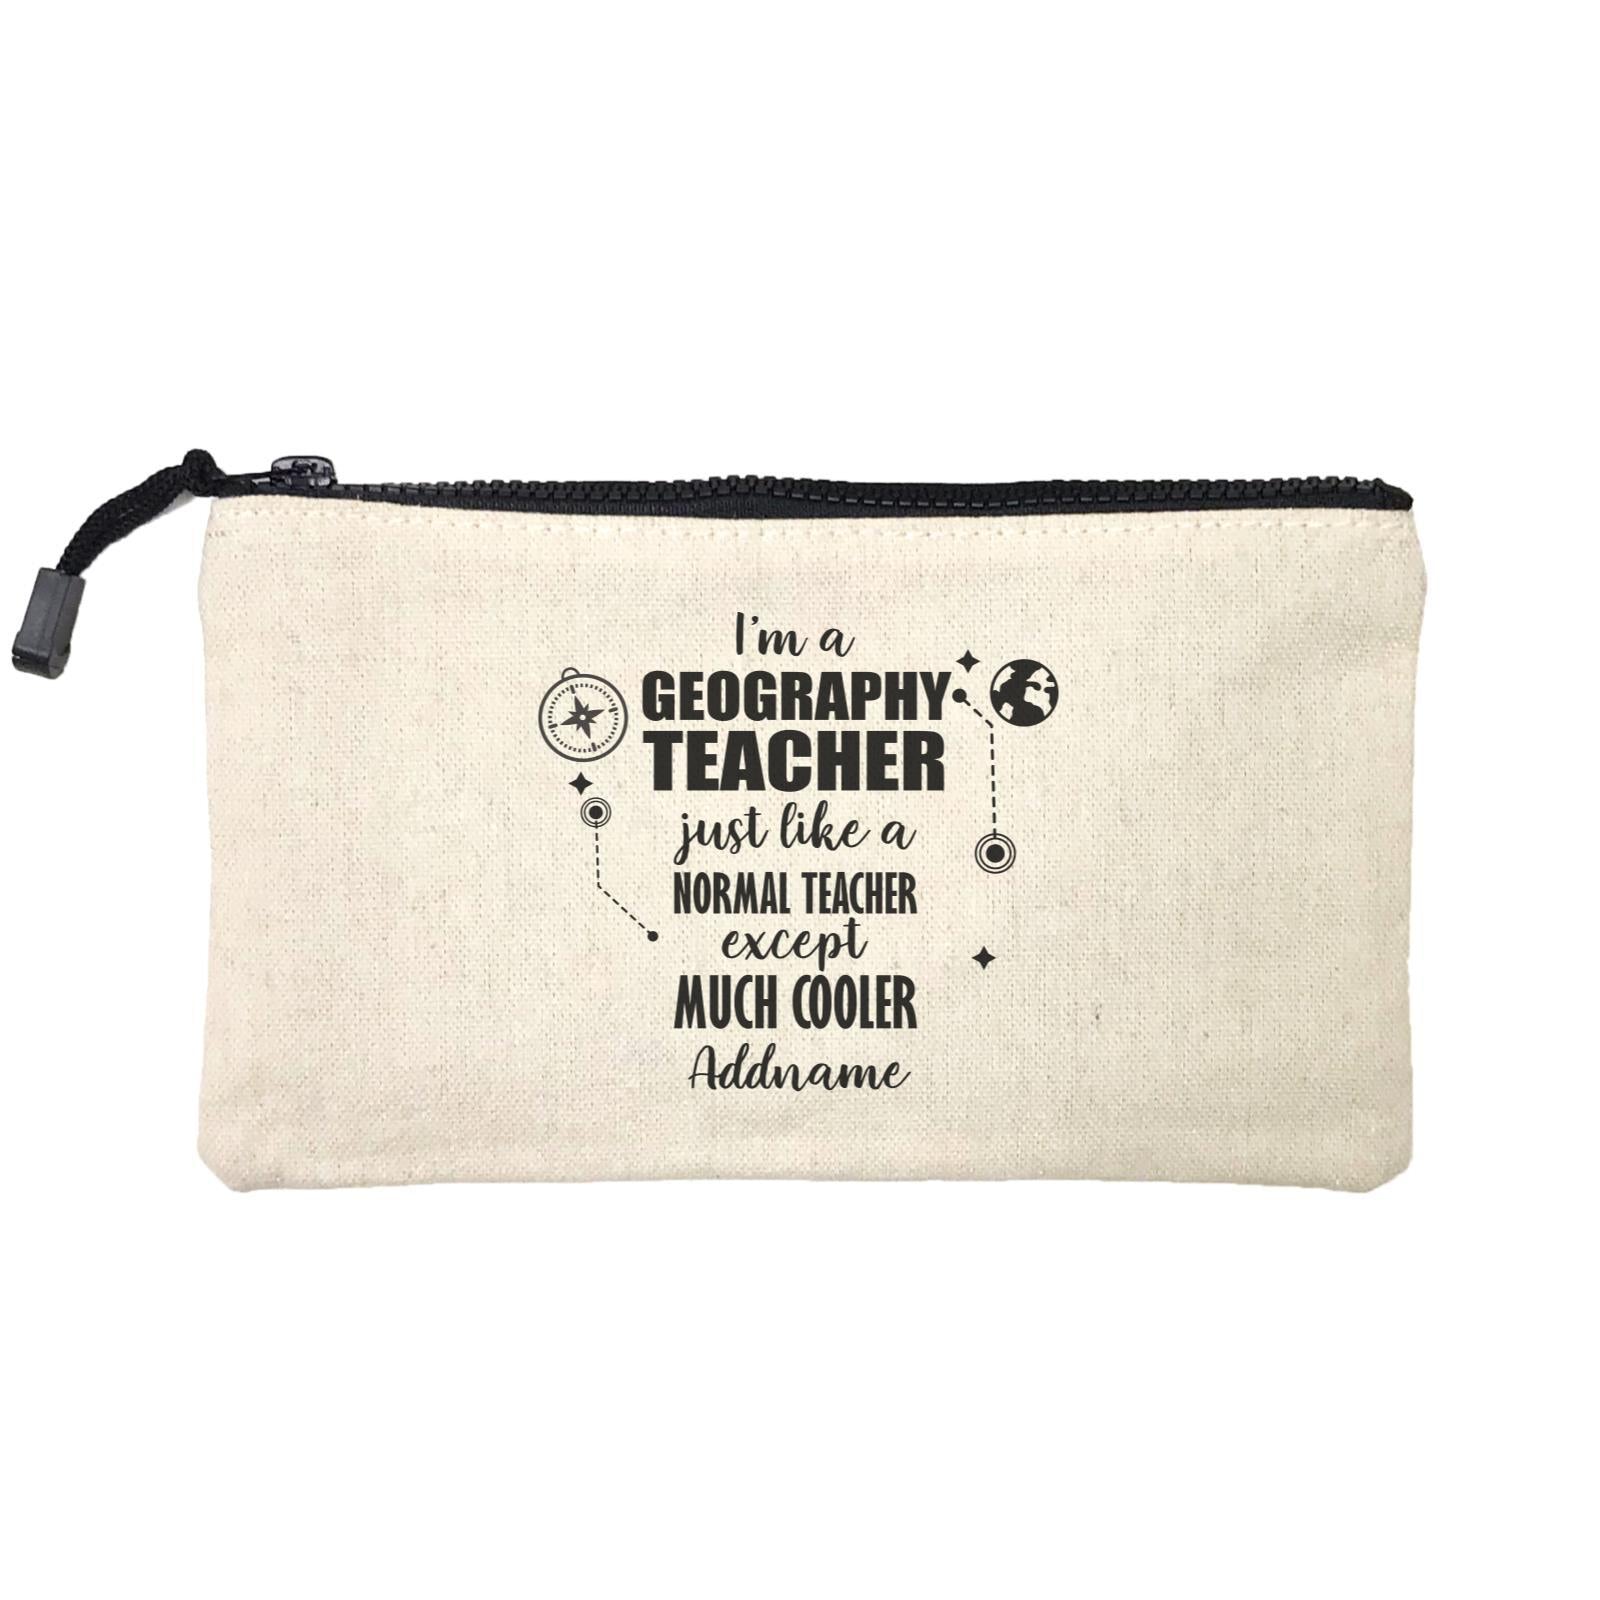 Subject Teachers 2 I'm A Geography Teacher Addname Mini Accessories Stationery Pouch